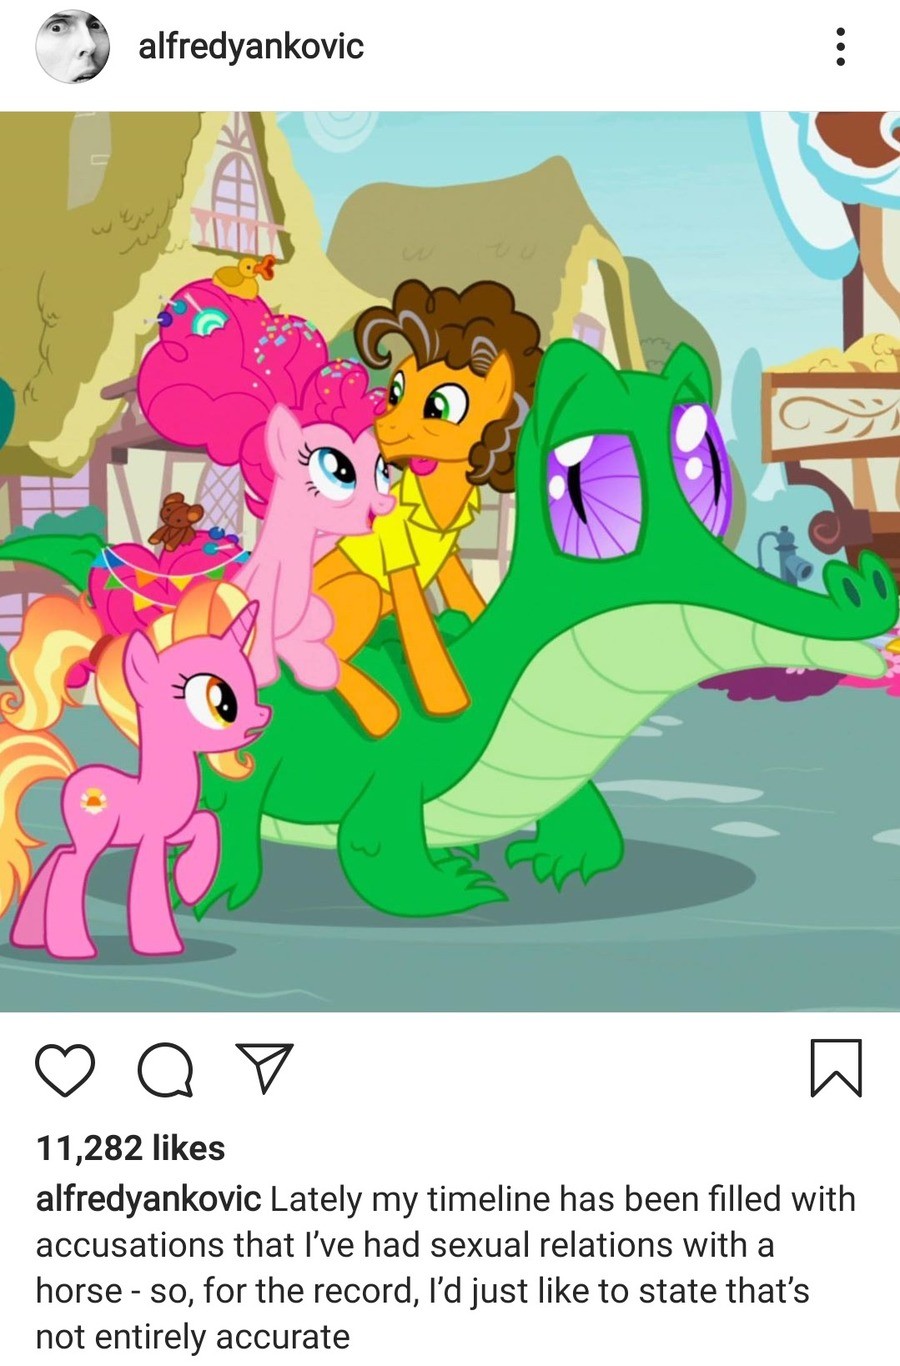 Weird Al Scandal. Yes, that yellow pony is voiced by Weird Al... Took me a few seconds to see that gummy was there